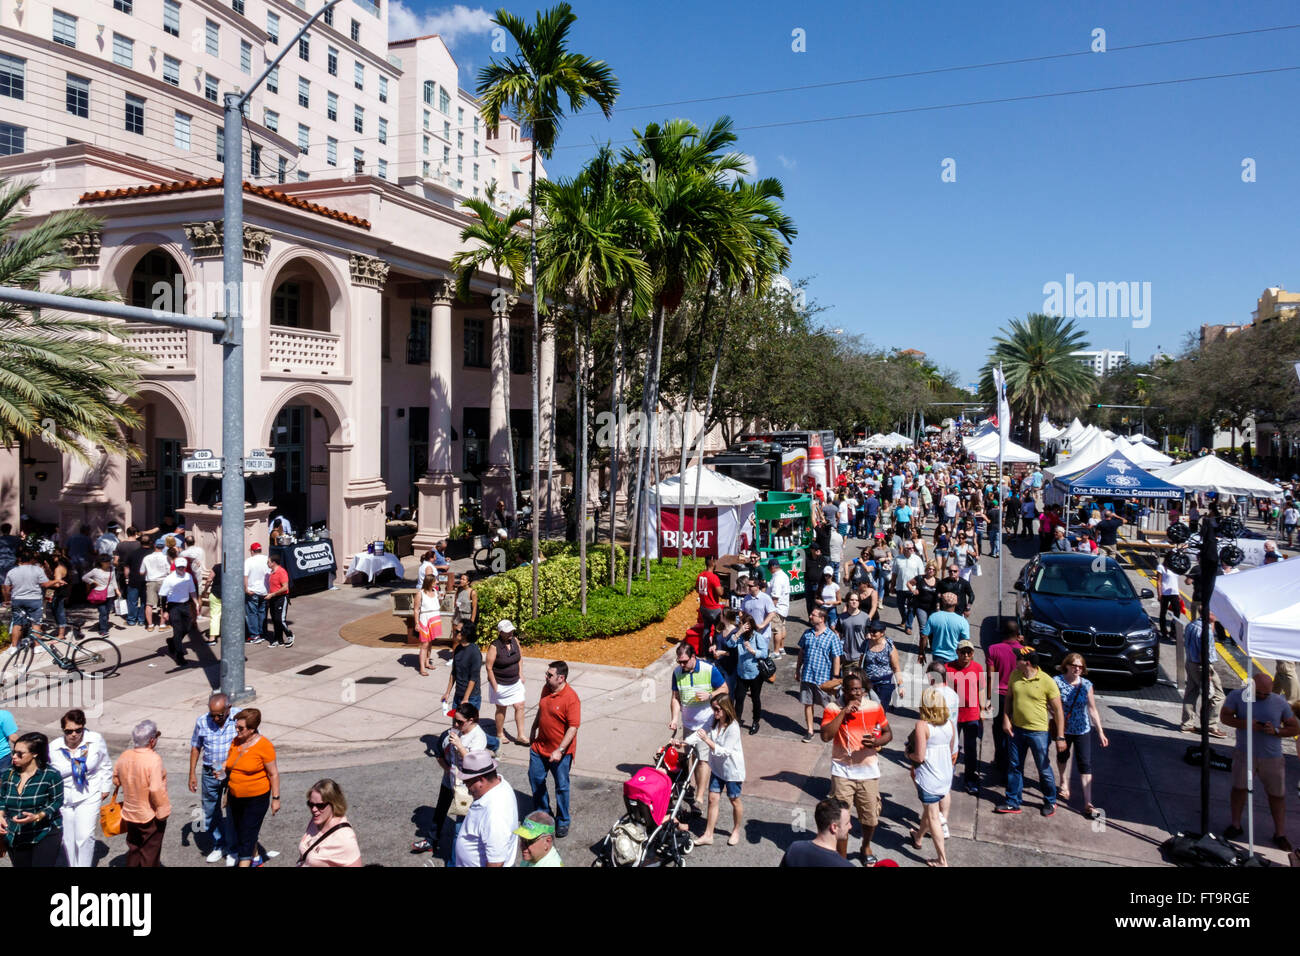 Miami Florida,Coral Gables,Carnaval Carnival Miracle Mile,street festival,annual celebration,Hispanic crowd,families,vendors,booths,stalls,FL160306021 Stock Photo